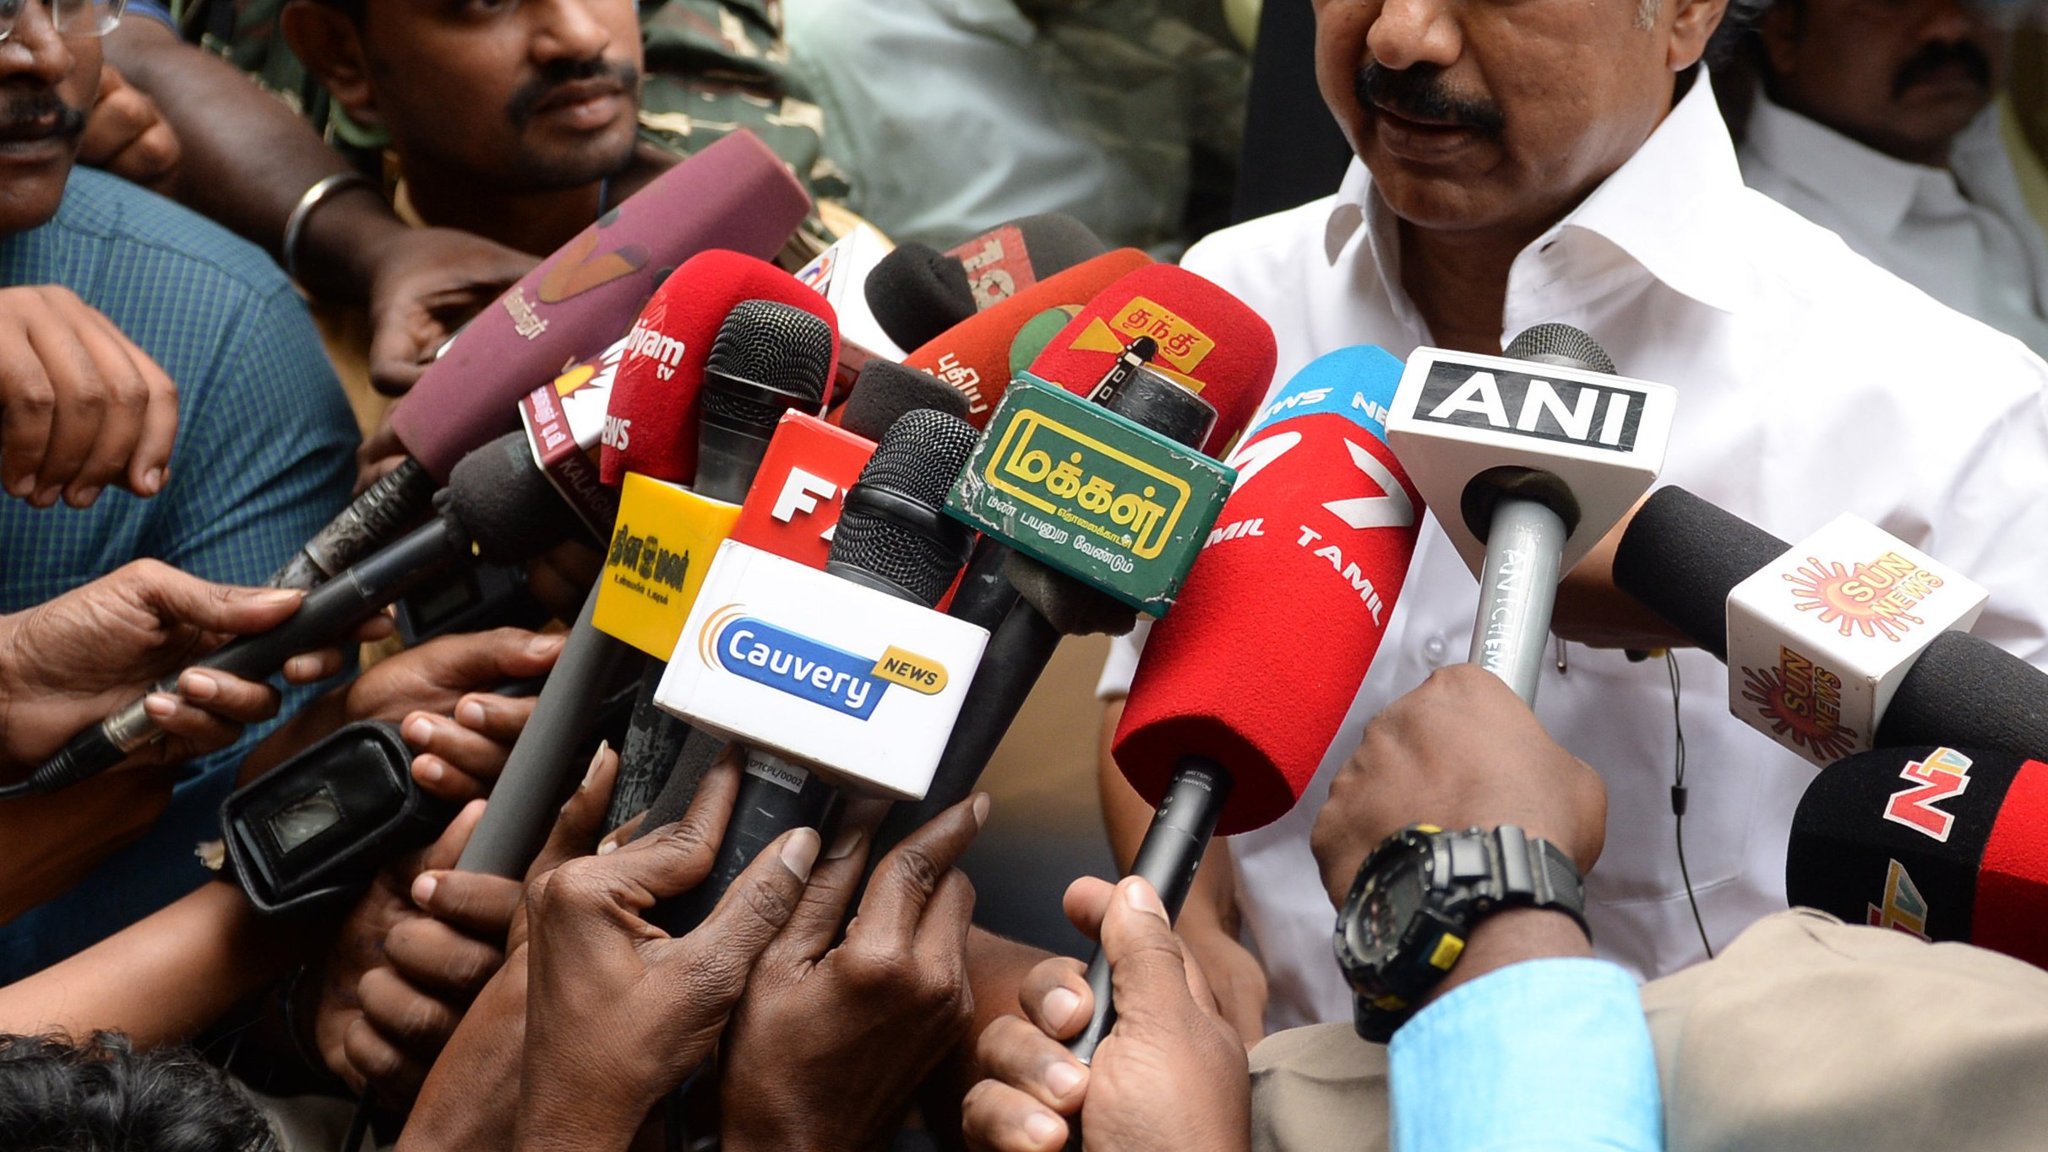 Indian Dravida Munnettra Kazhagam (DMK) party working President MK Stalin talks to media at the home of party leader Karunanidhi in Chennai on December 21, 2017.
India's former telecoms minister was cleared December 21 of his alleged role in a multi-billion dollar rort that ballooned into one of the country's biggest-ever political scandals. A special court in New Delhi acquitted A. Raja of corruption and also dropped charges against a slew of other bureaucrats and corporate executives implicated in the 2008 scandal that cost the state billions in lost revenue. / AFP PHOTO / ARUN SANKAR        (Photo credit should read ARUN SANKAR/AFP/Getty Images)